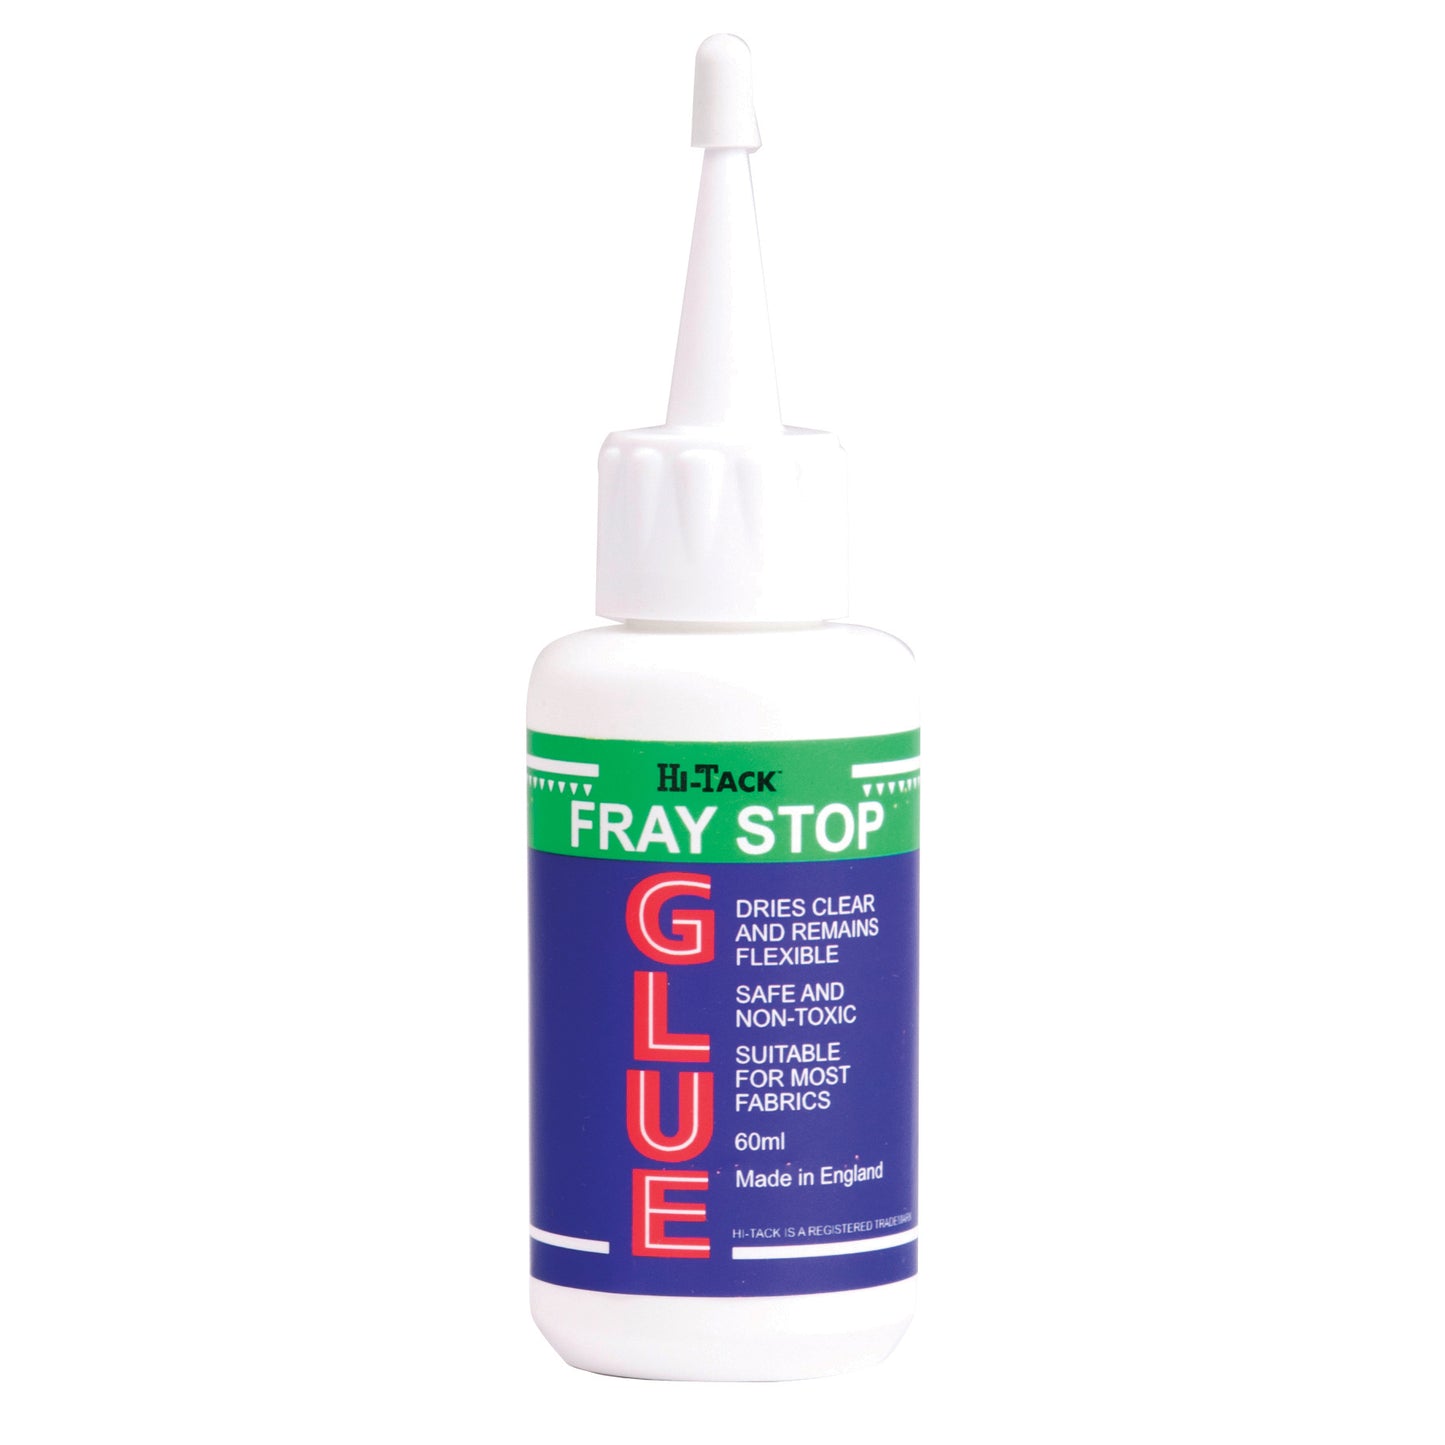 Hi-Tack Fray Stop Glue 60ml - suitable for most fabrics